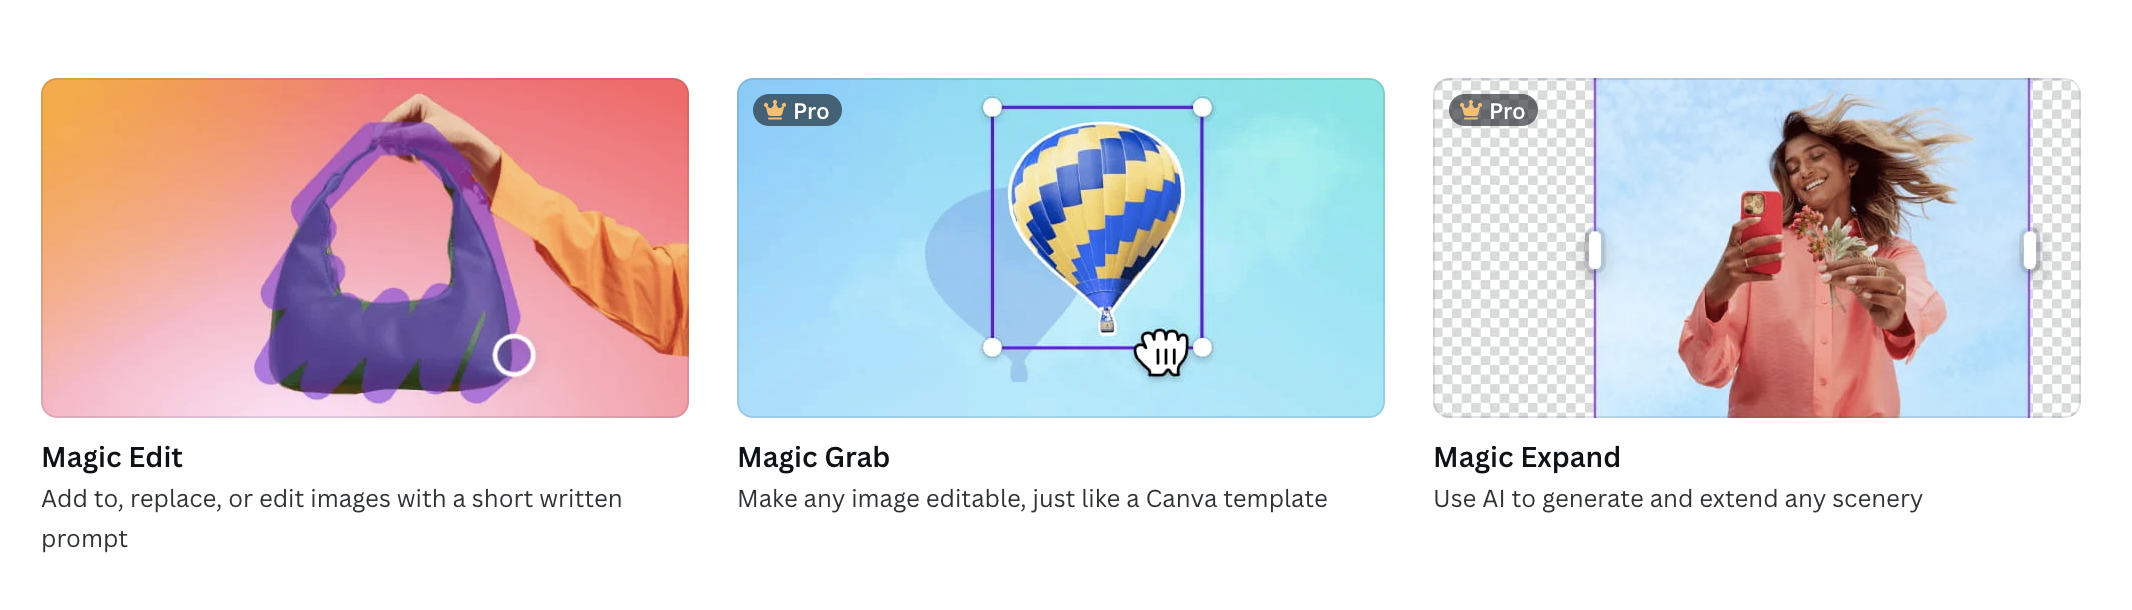 Canva's vast library of images, icons, fonts and templates specific to social media platforms.